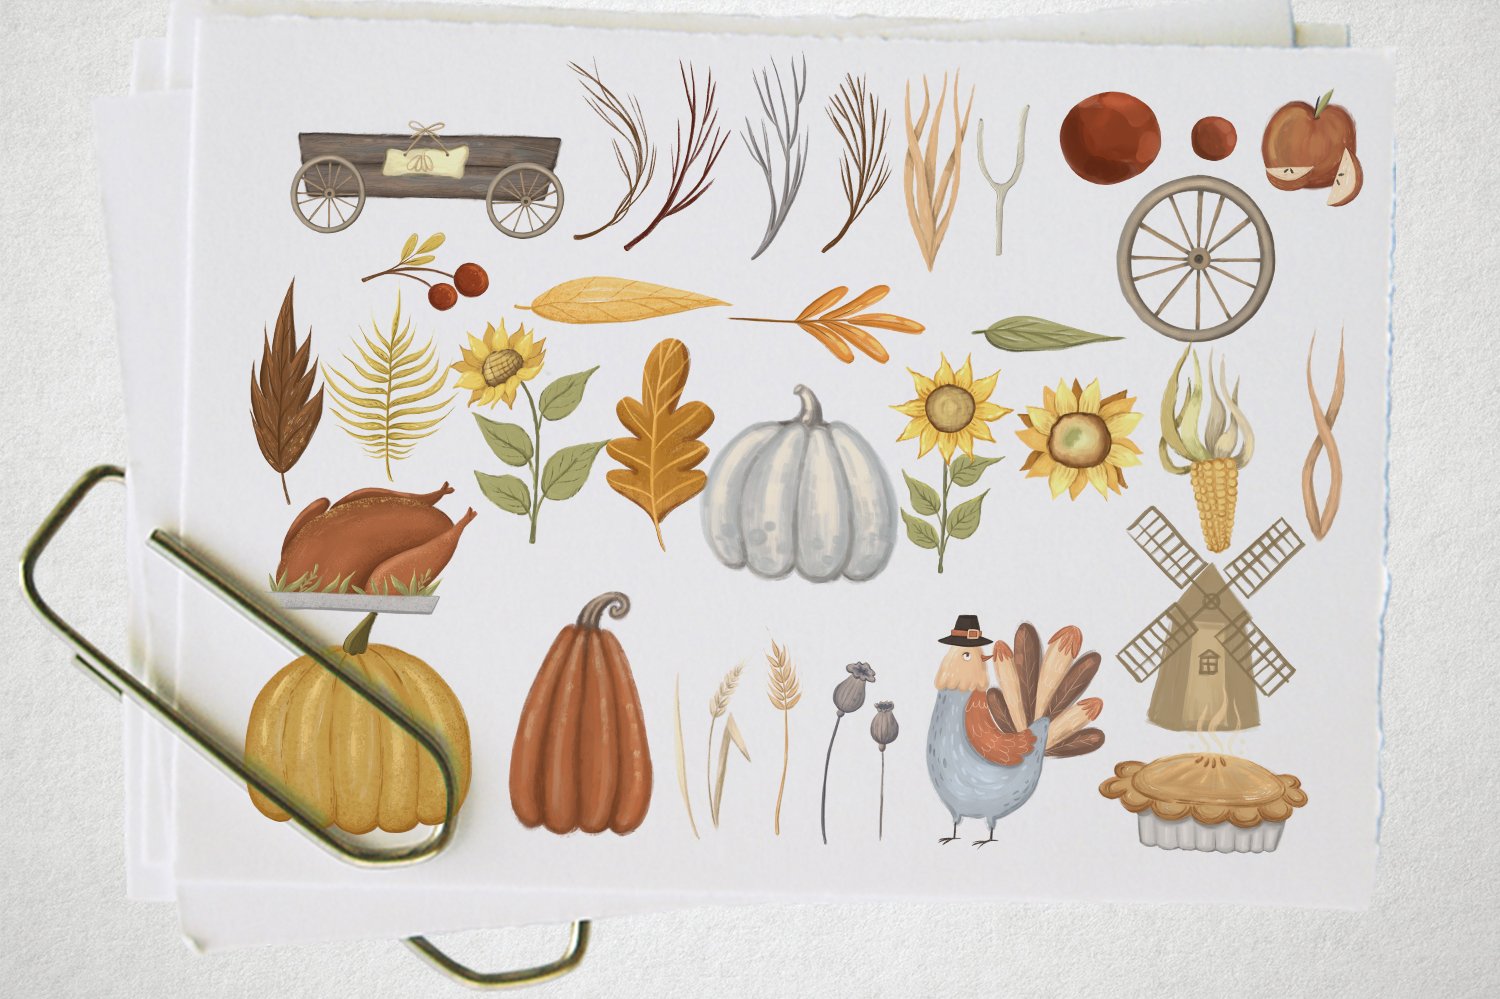 White background with autumn elements for Thanksgiving celebration.